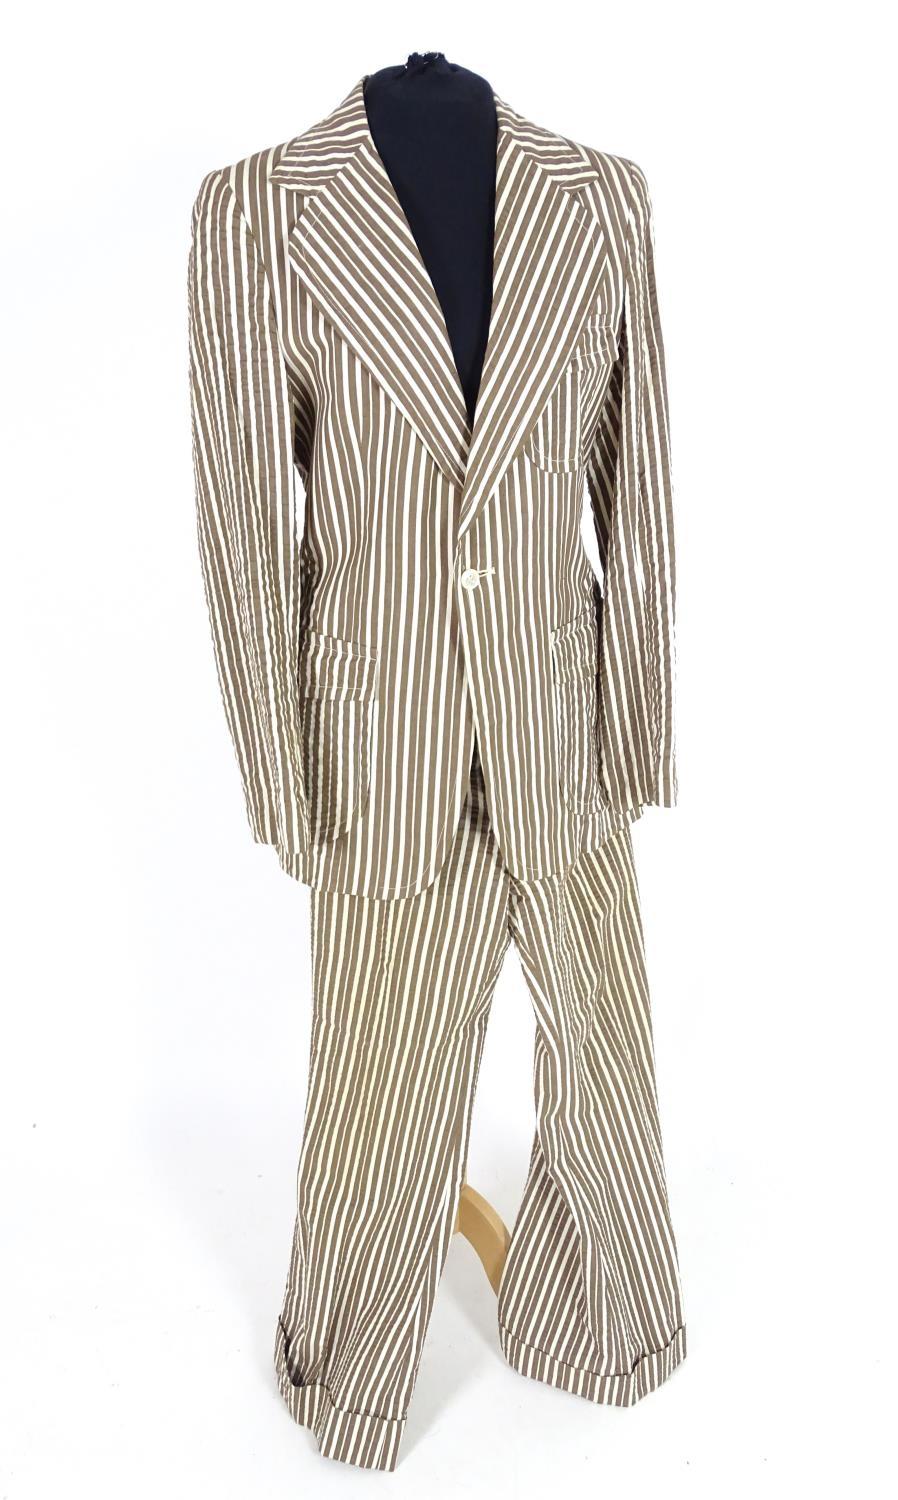 2 vintage stripy suits by Austins, a light brown and cream striped jacket and trousers along with - Image 6 of 10